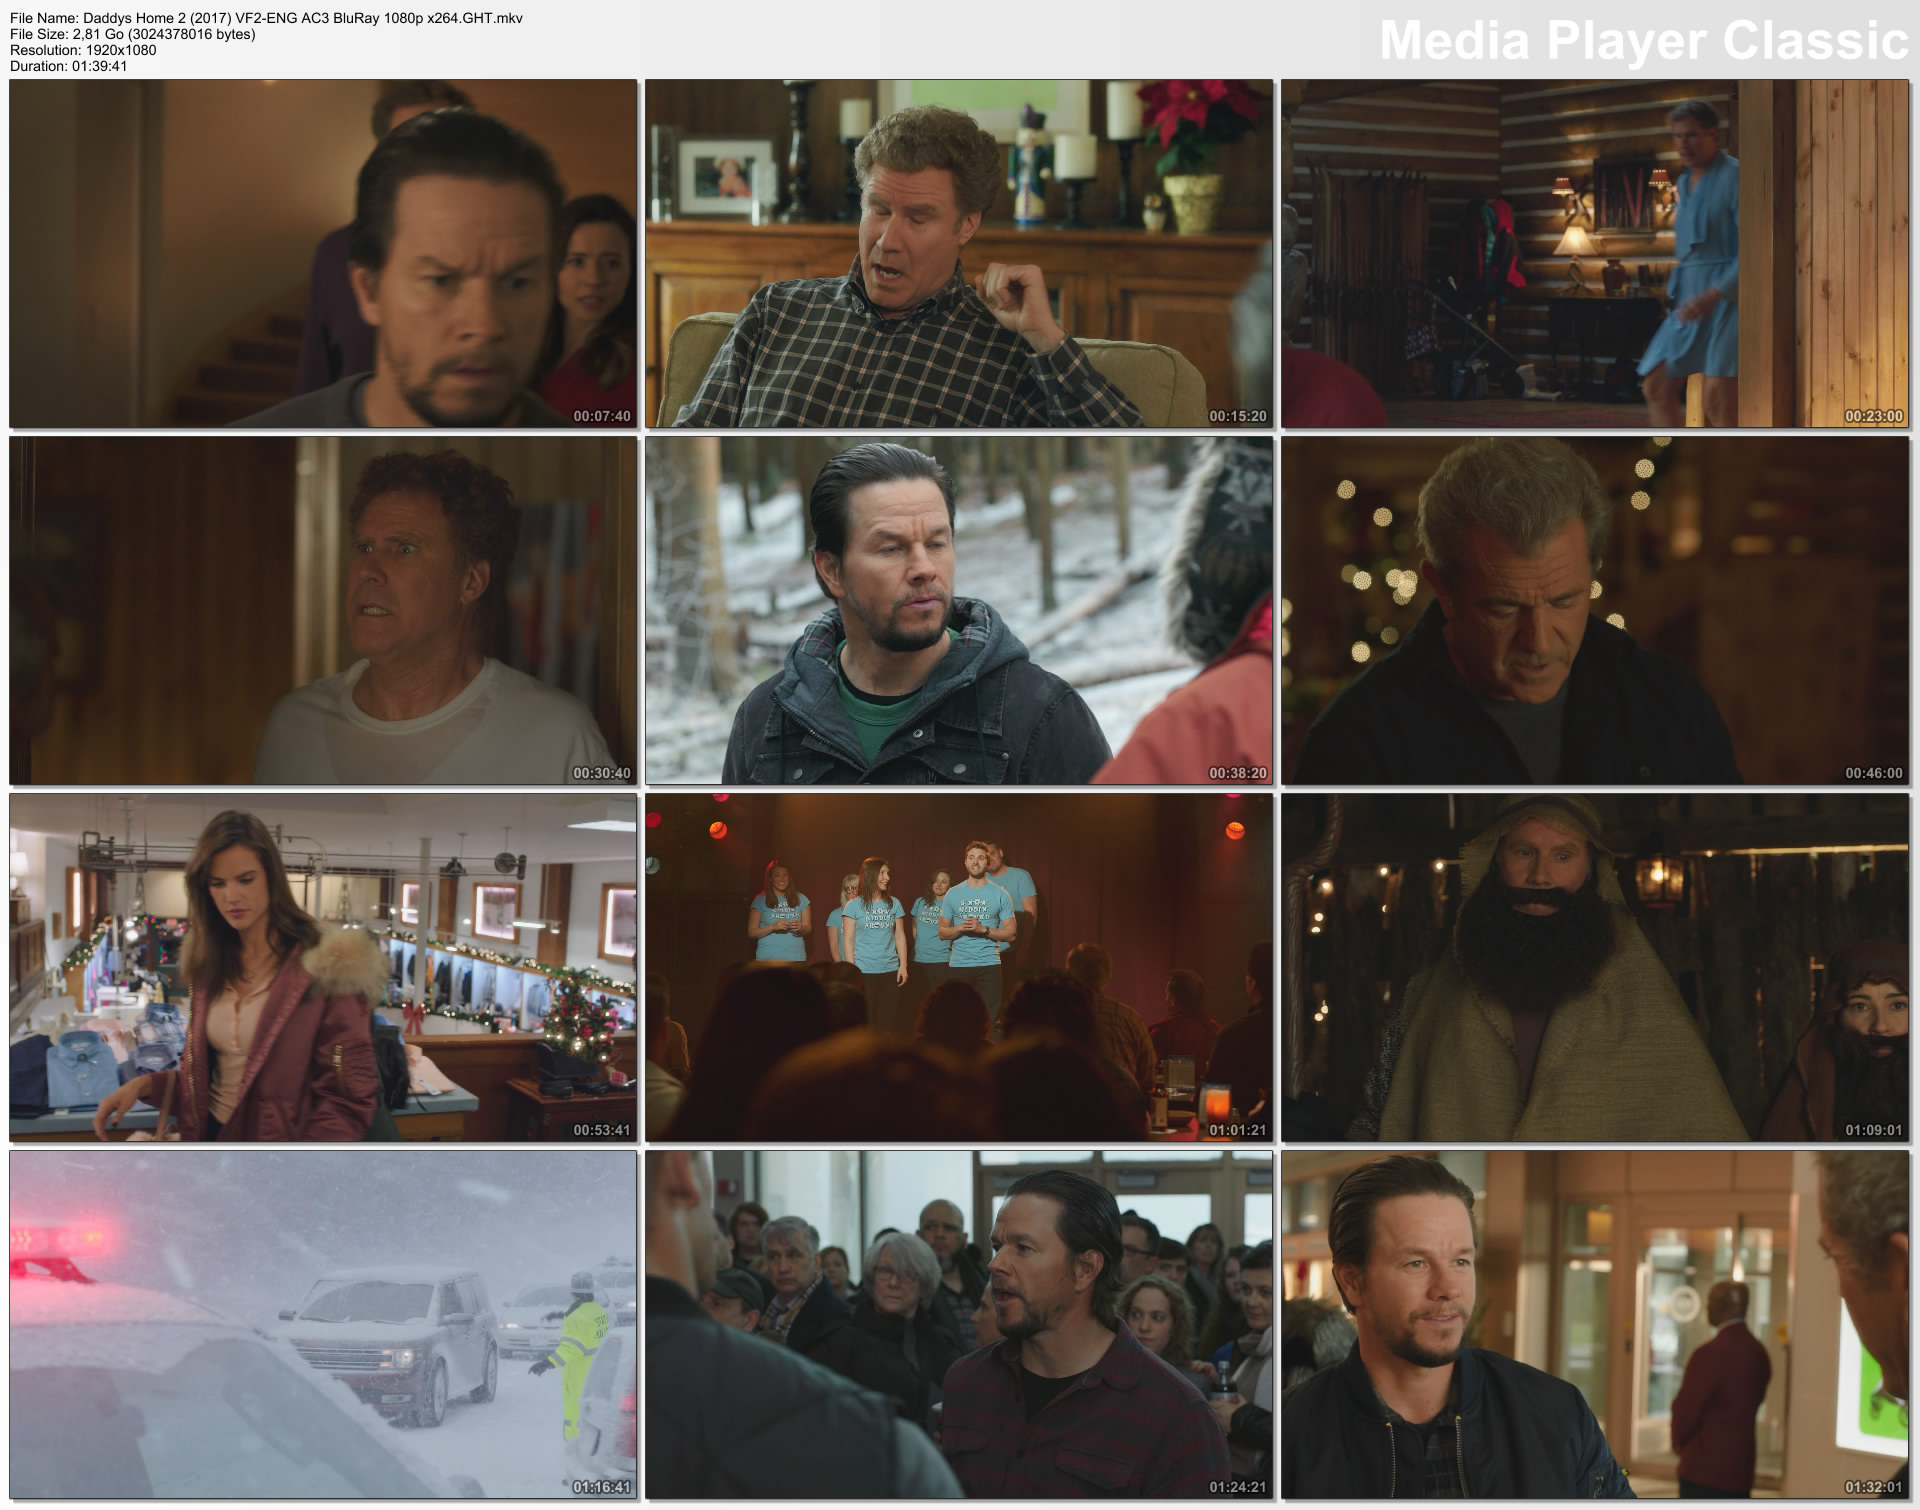 Daddys Home 2 (2017) VF2-ENG AC3 BluRay 1080p x264.GHT